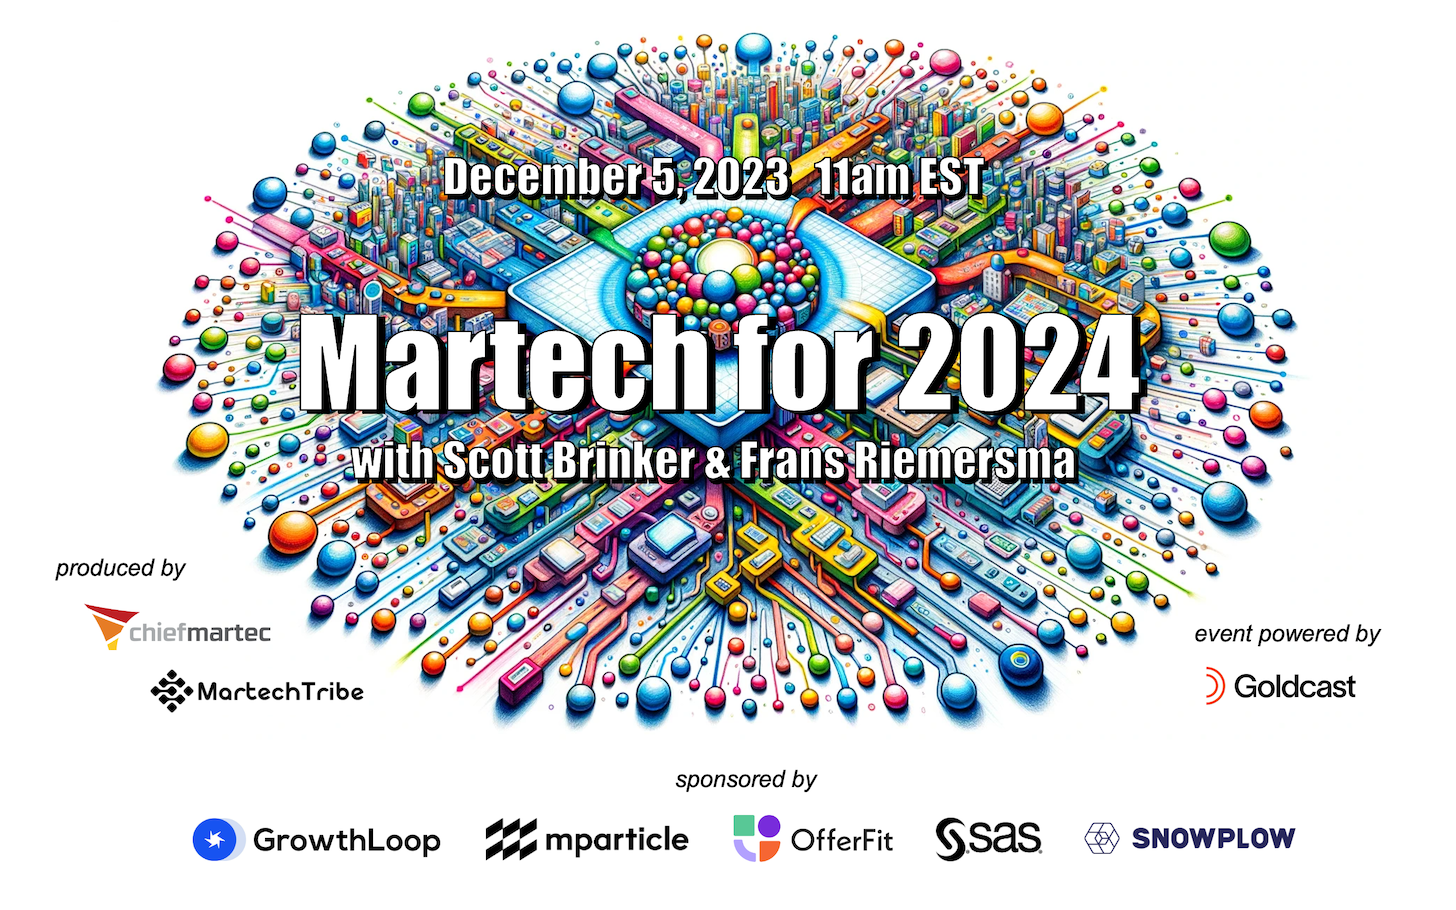 Martech for 2024 Report and Webinar